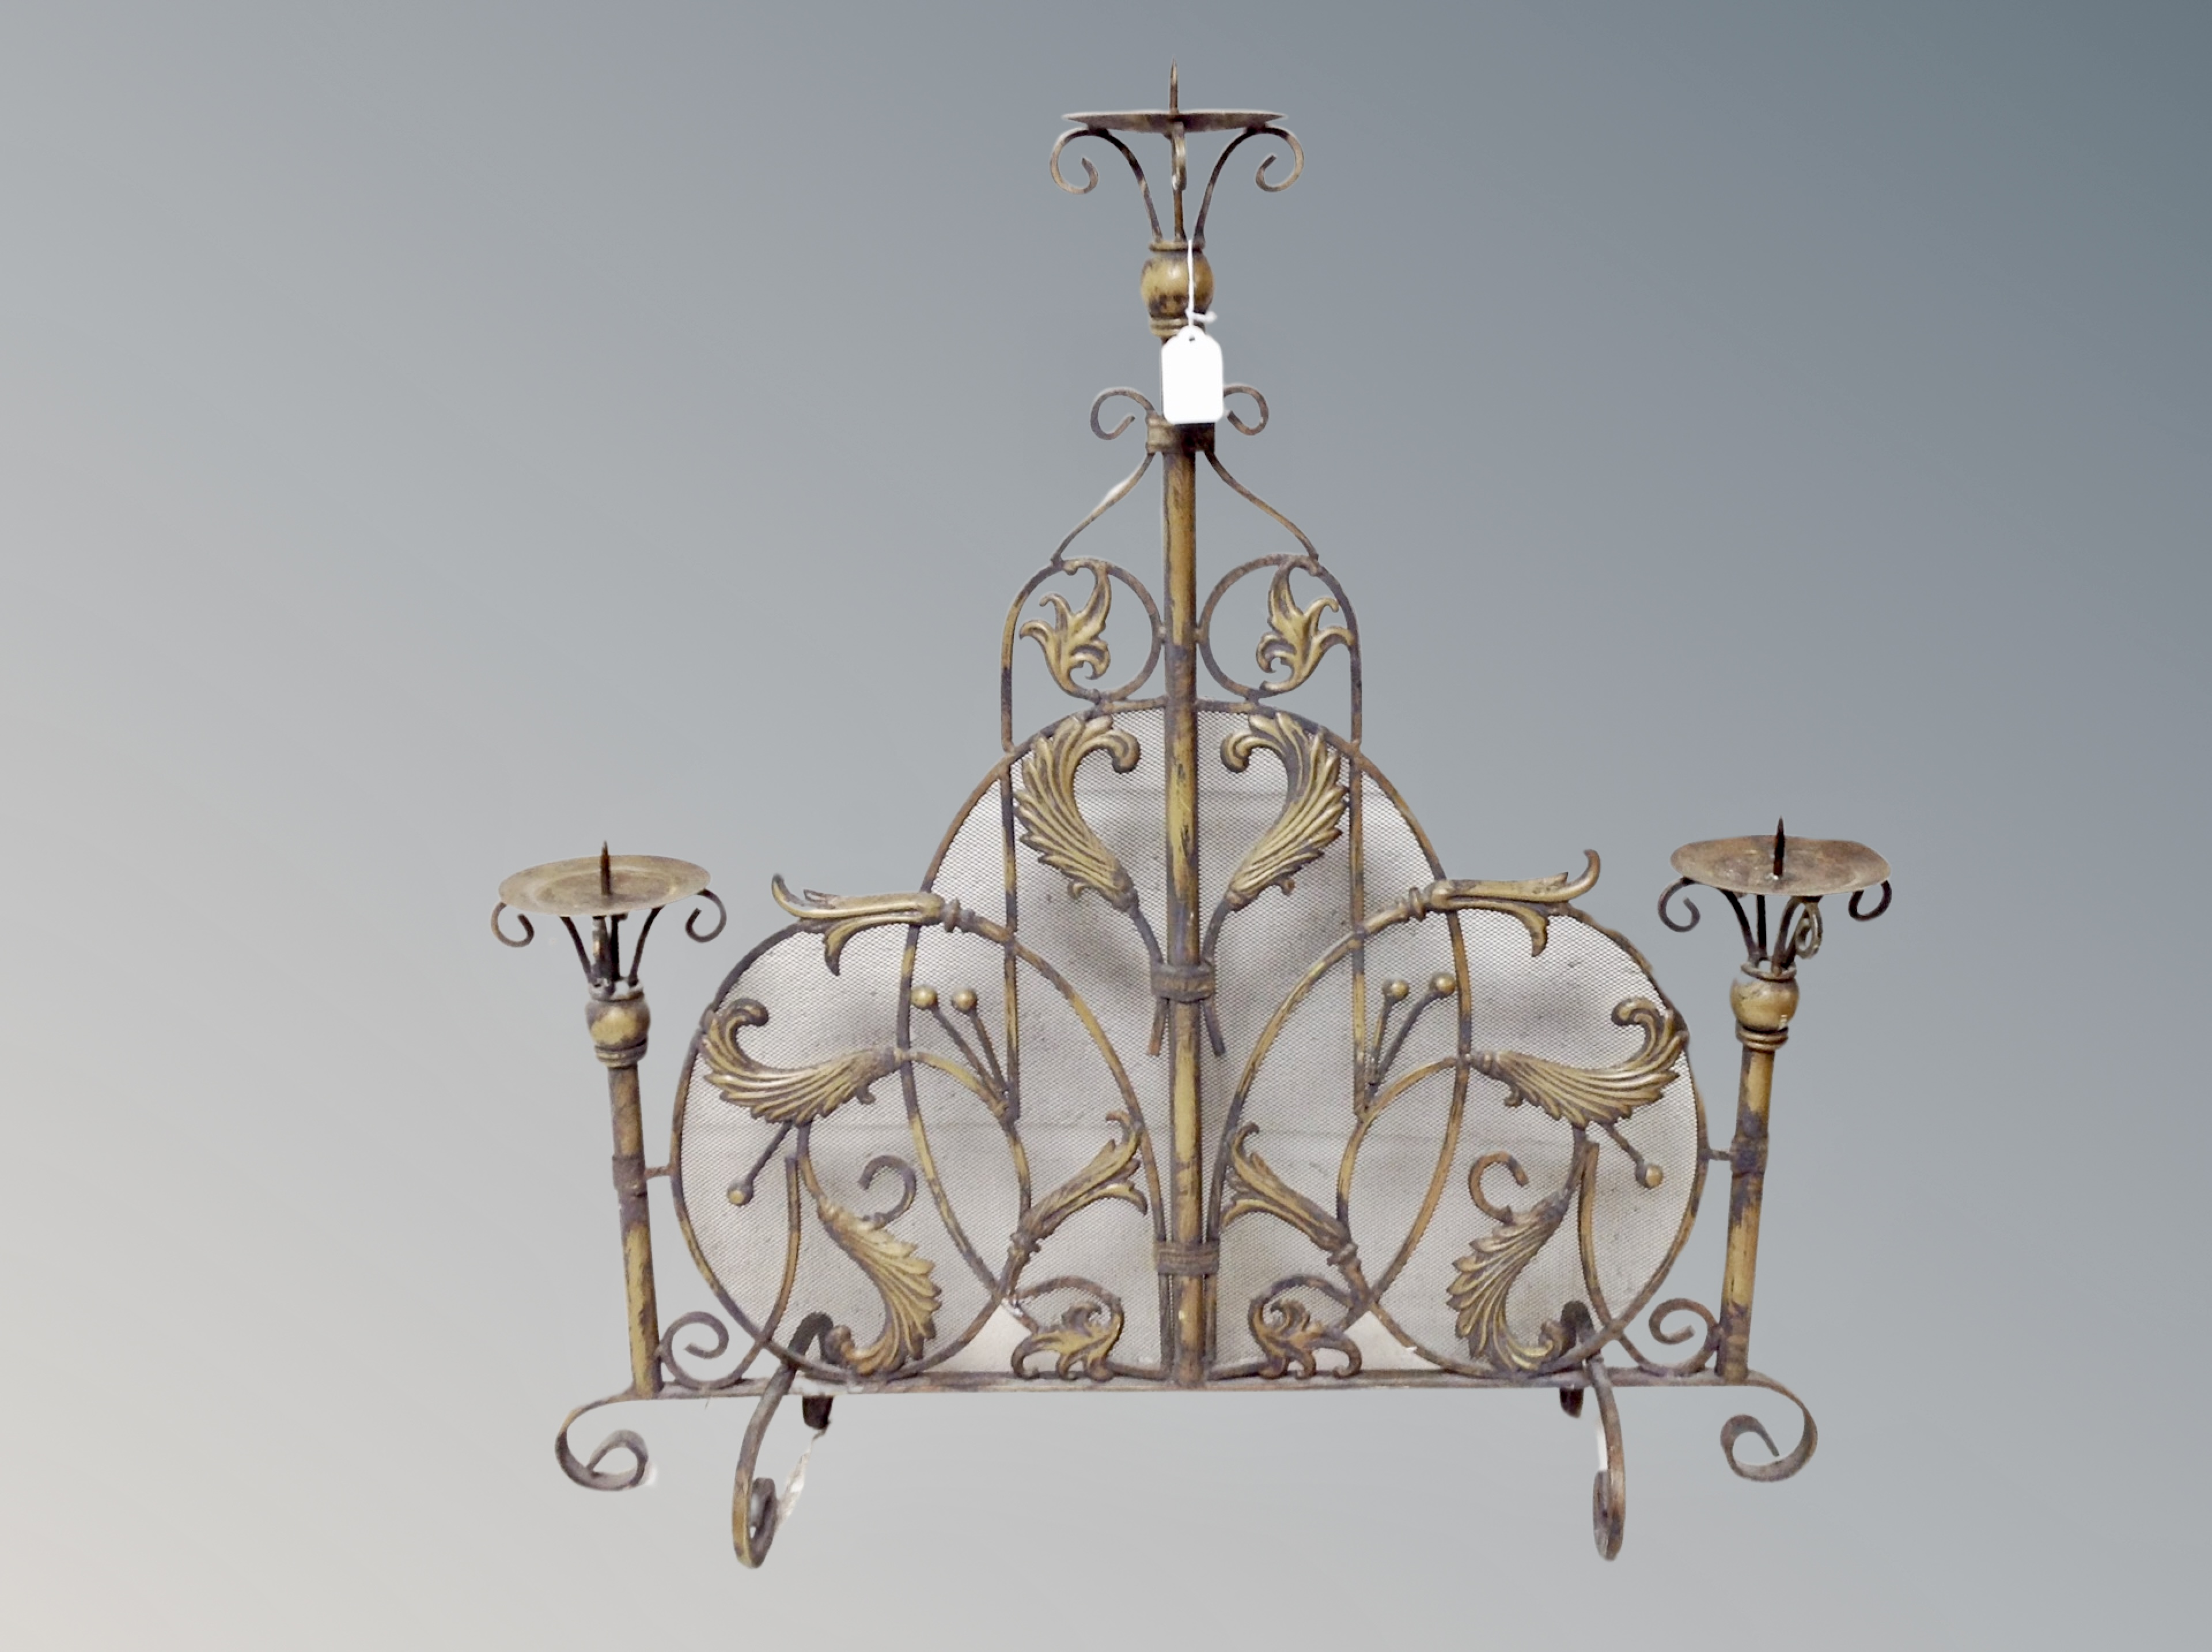 An ornate cast metal fire guard with three pricket candlesticks,